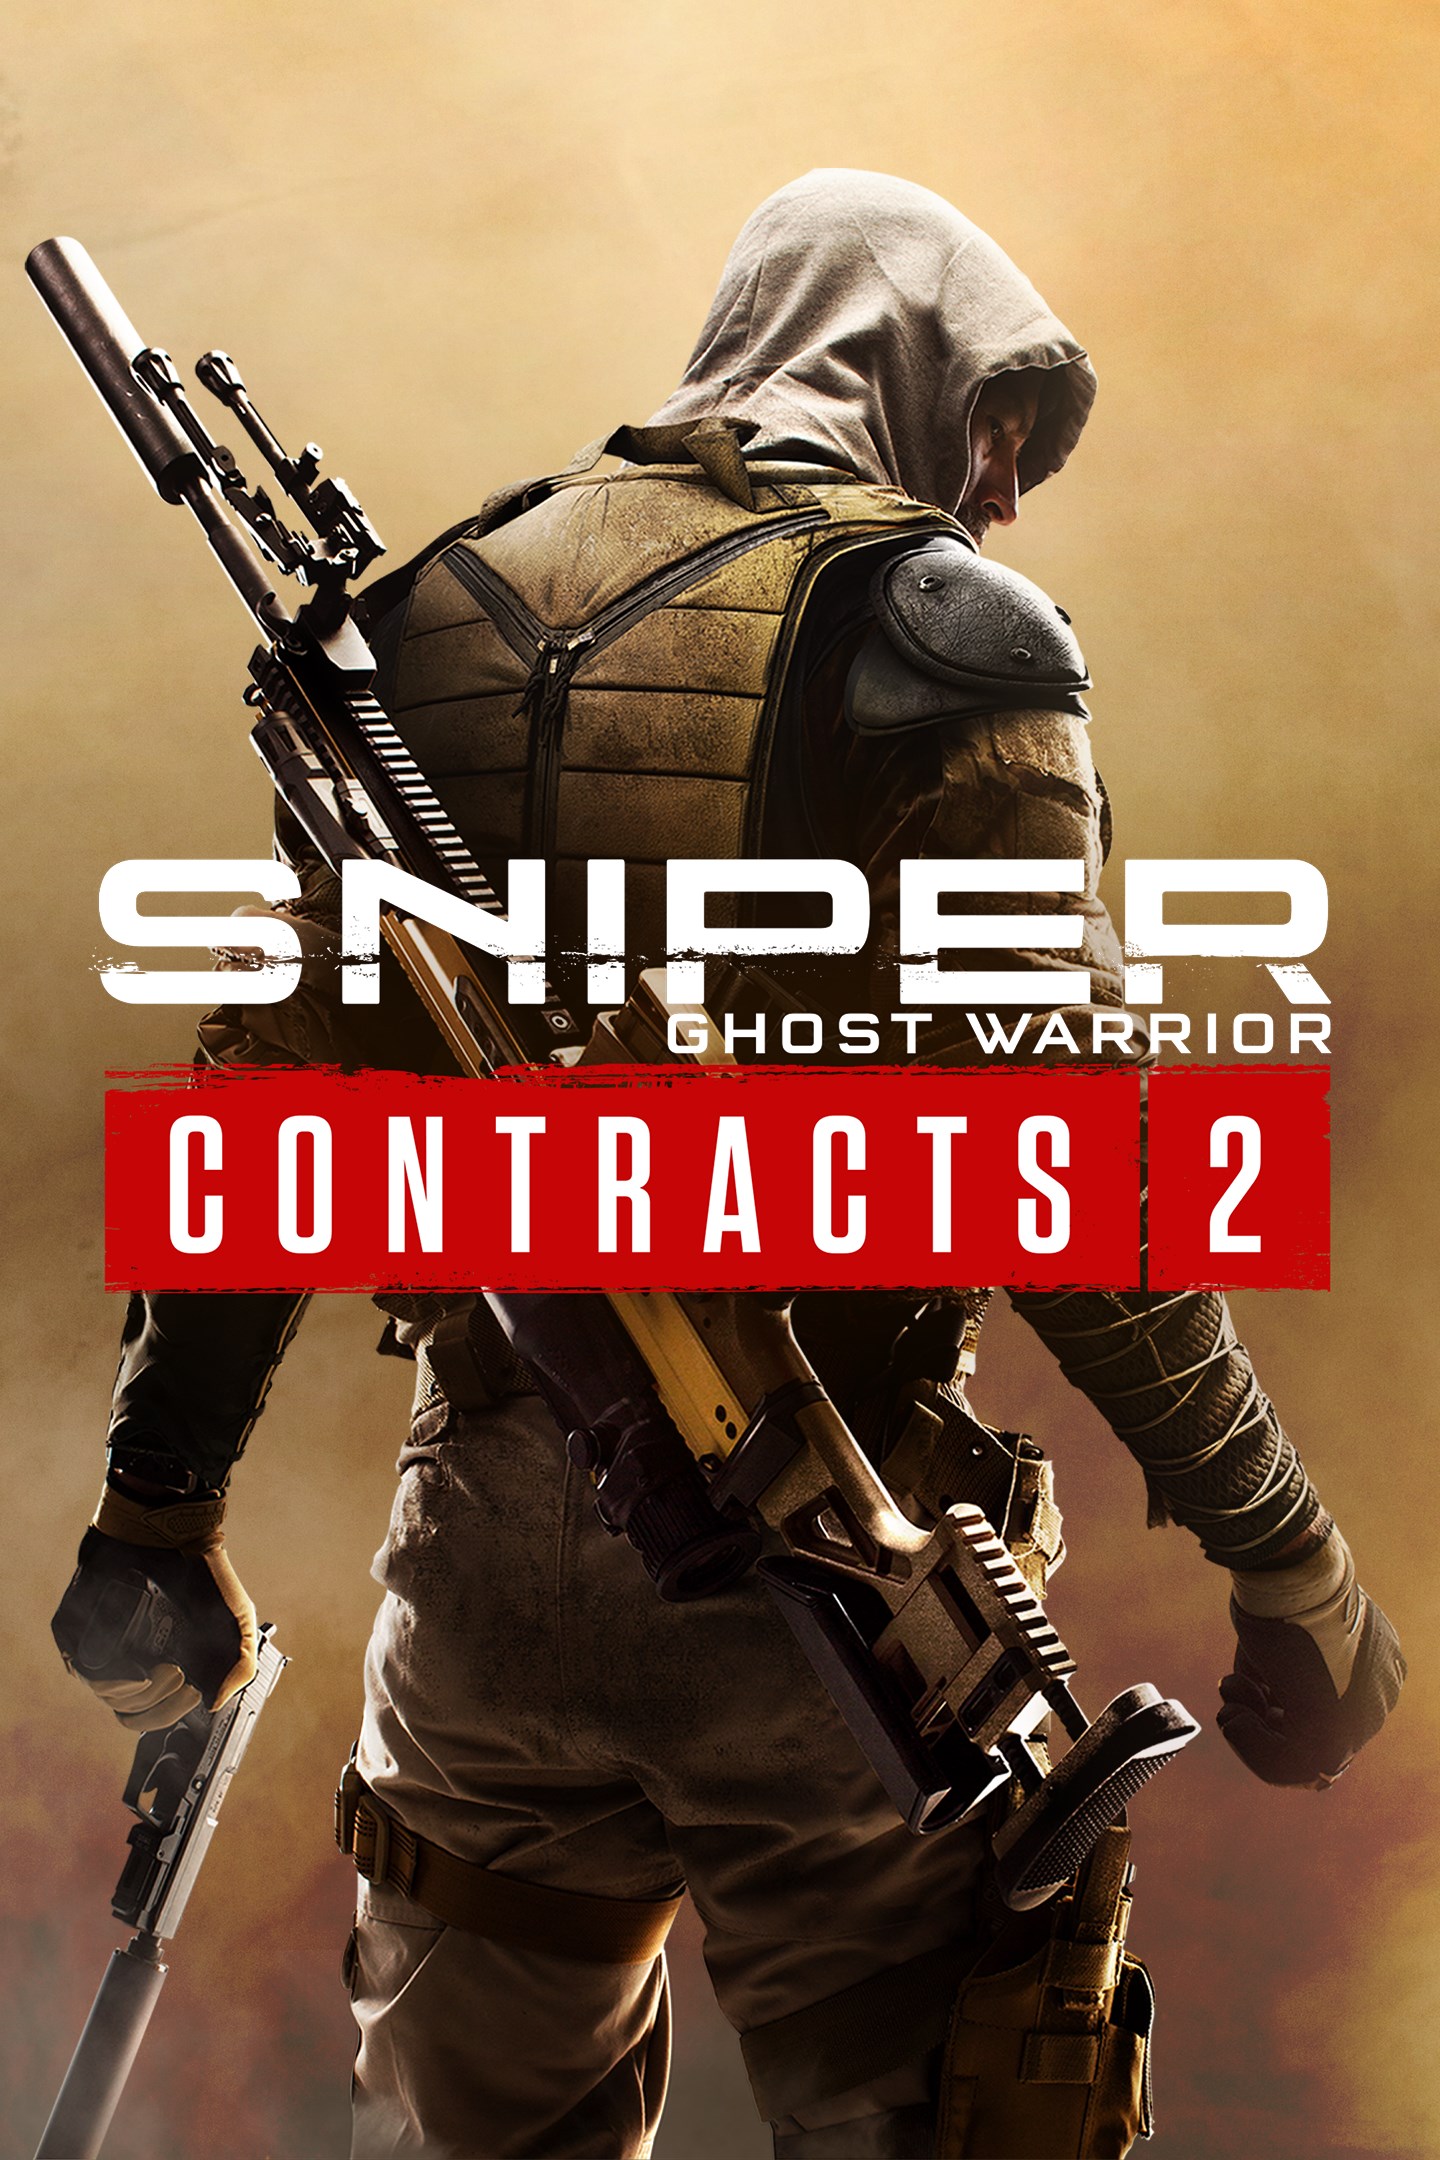 Sniper: Ghost Warrior Contracts 2